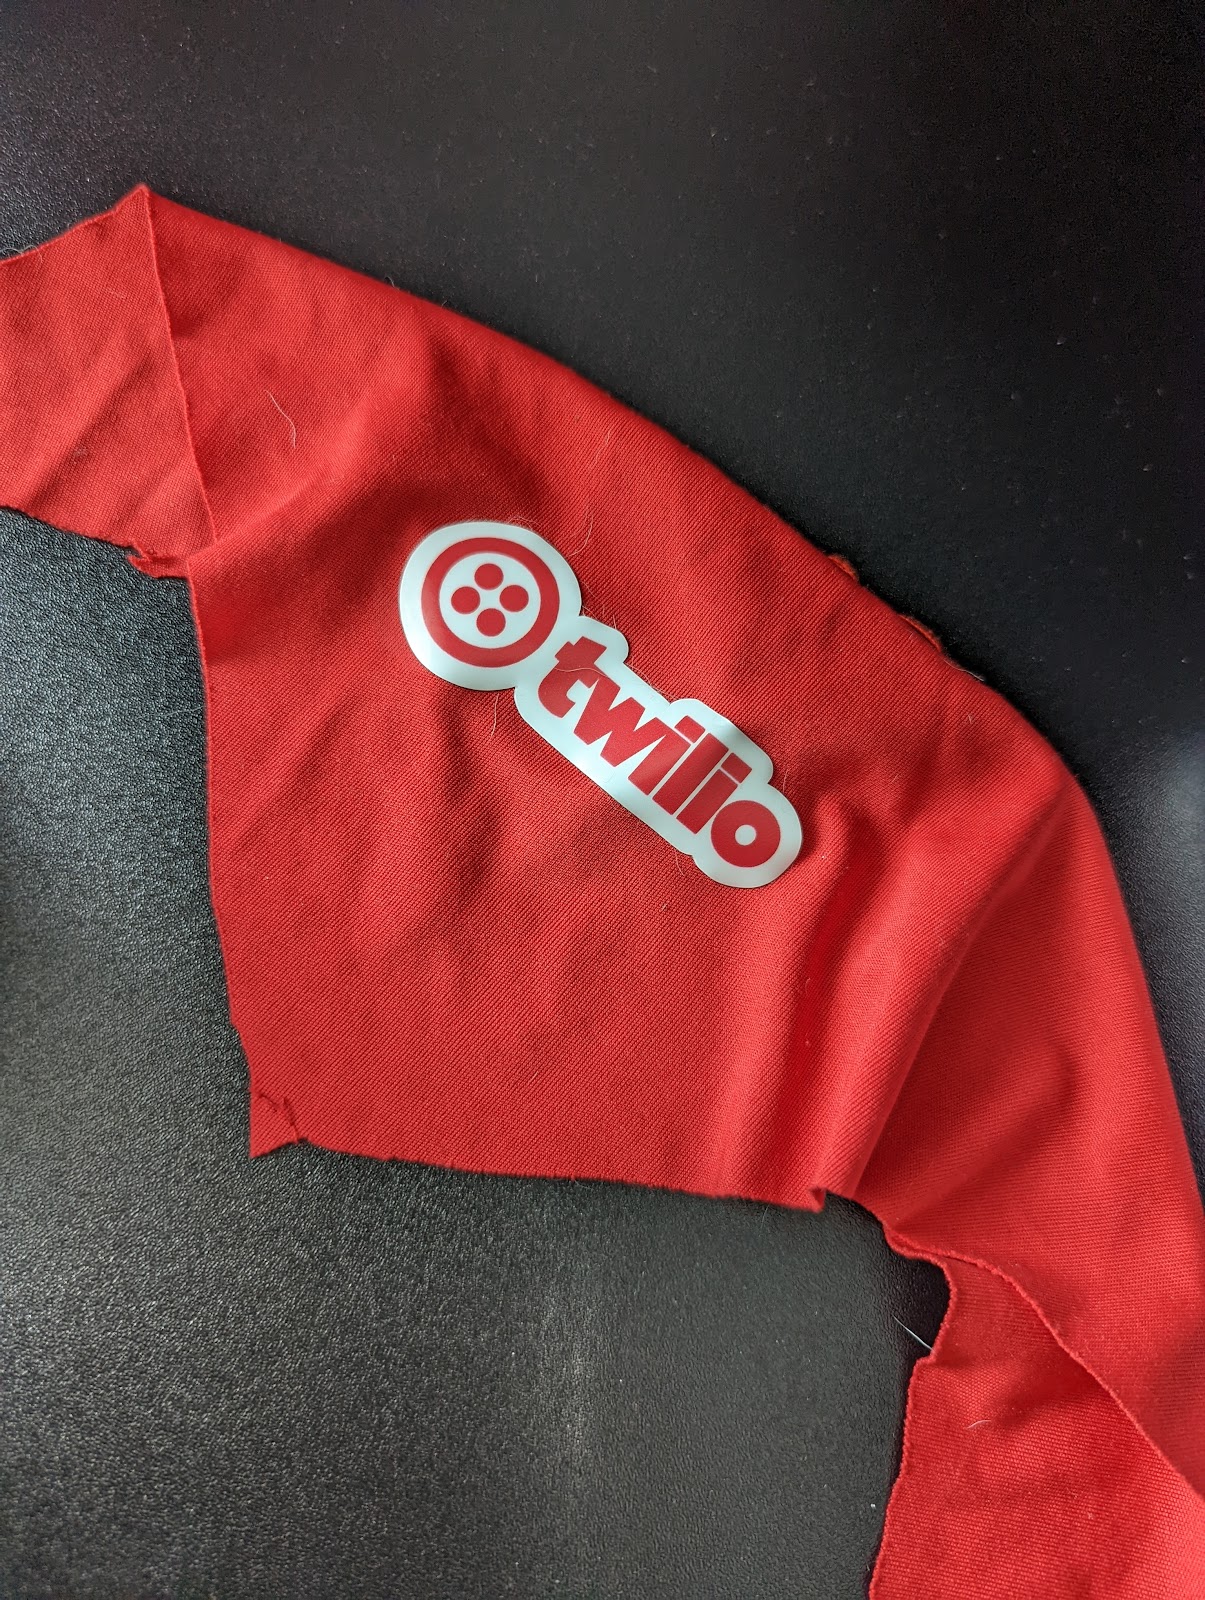 Twilio themed bandana with a pocket sewn in the back for the BLE tag